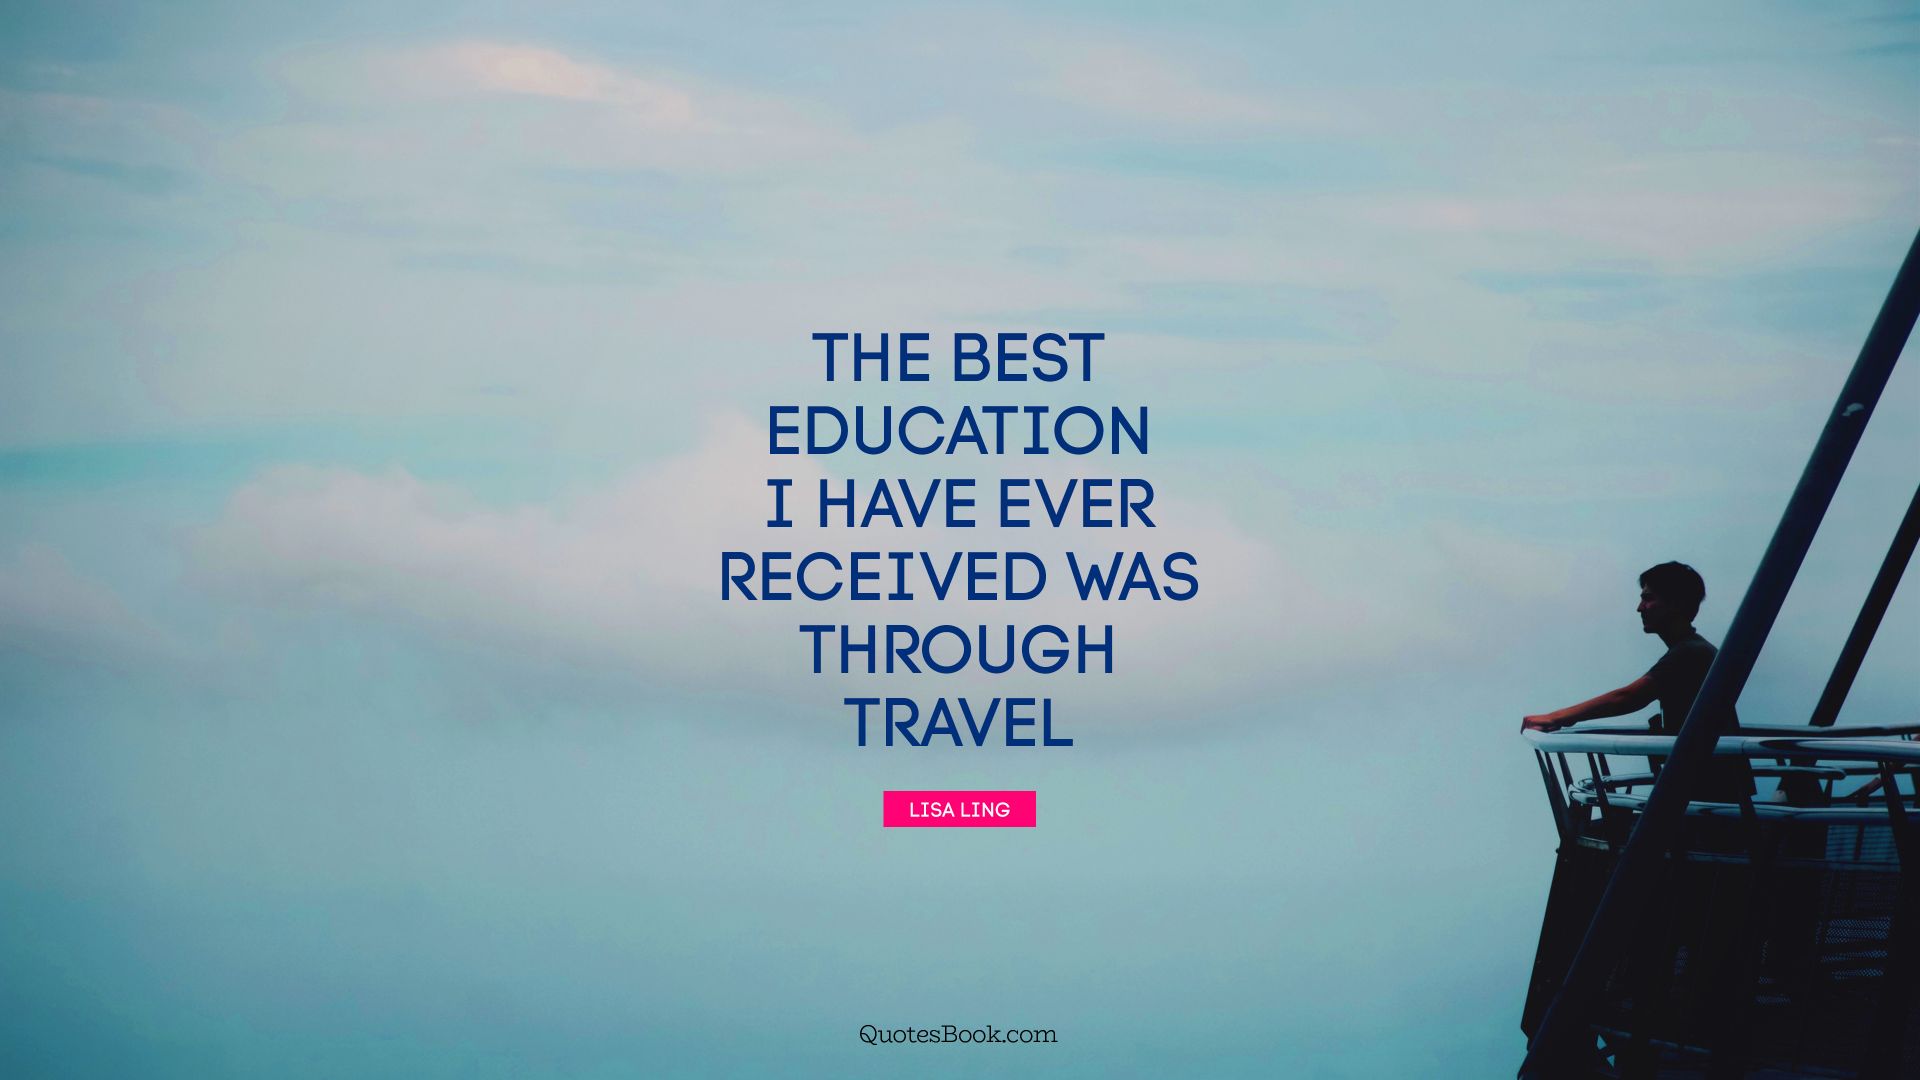 The best education I have ever received was through travel. - Quote by Lisa Ling